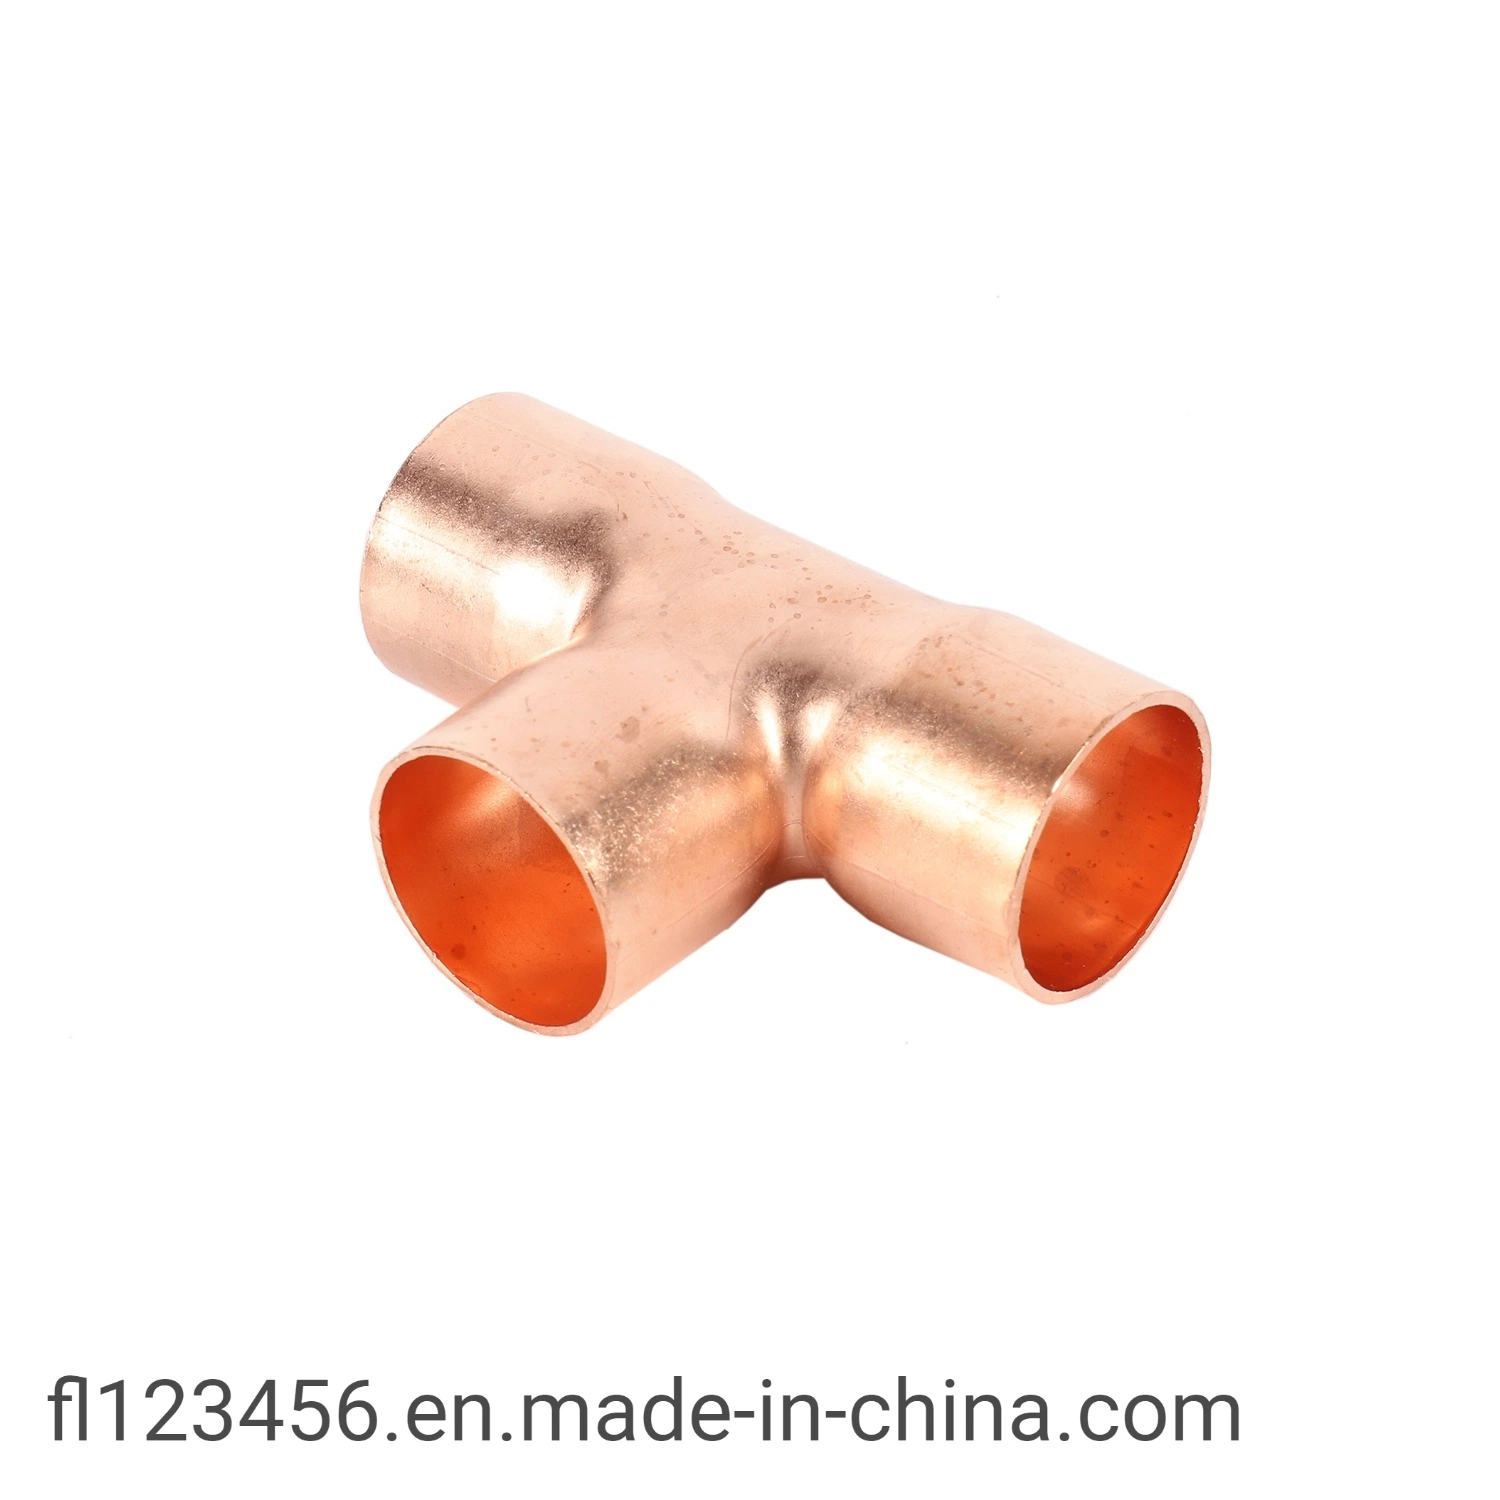 Refrigeration Parts Three Way Plumbing Welding Copper Fitting Tee Pipe Connectors Hardware Fittings